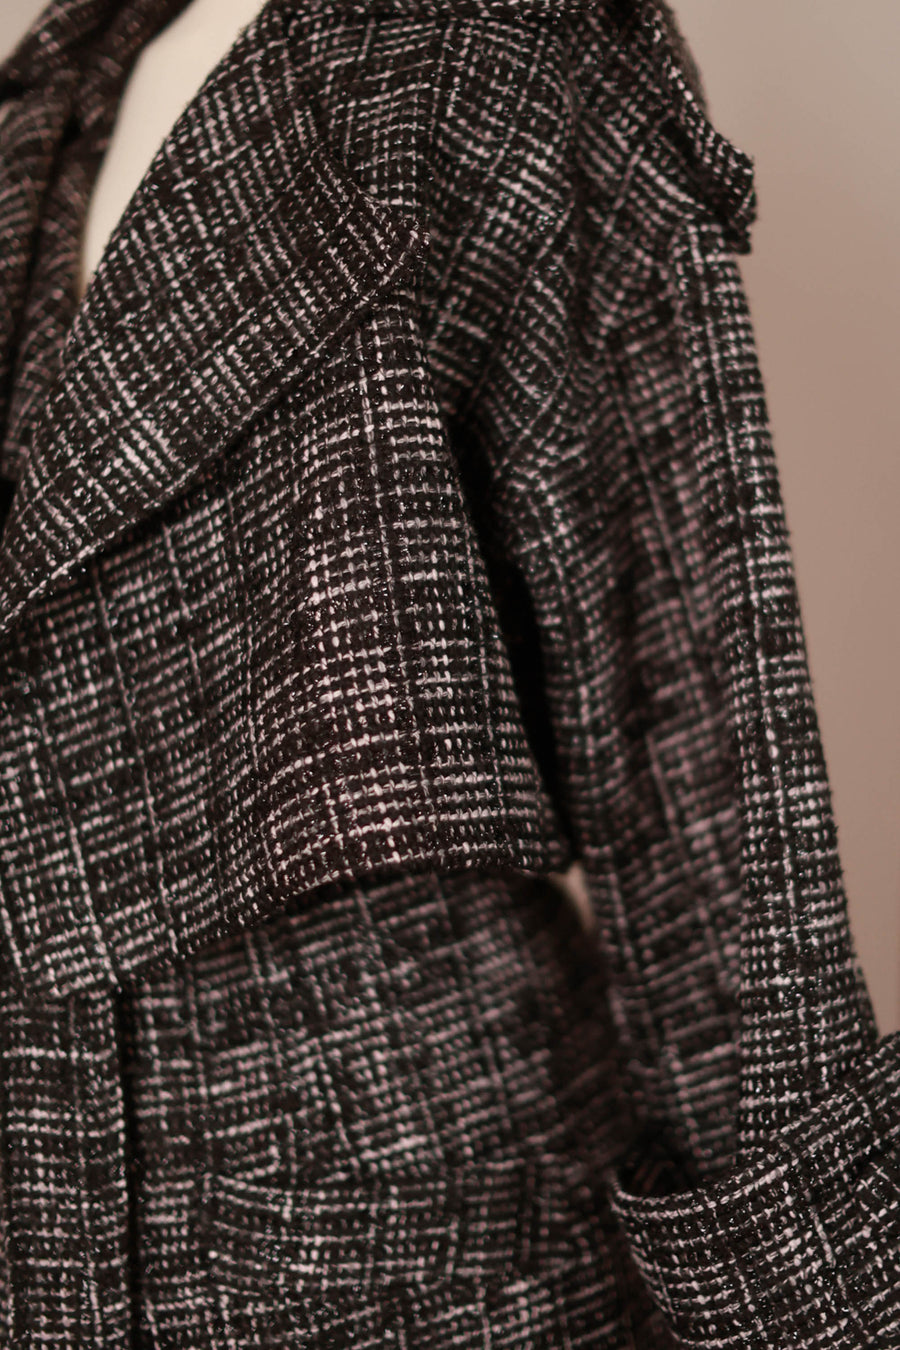 French Trench in Dappled Tweed